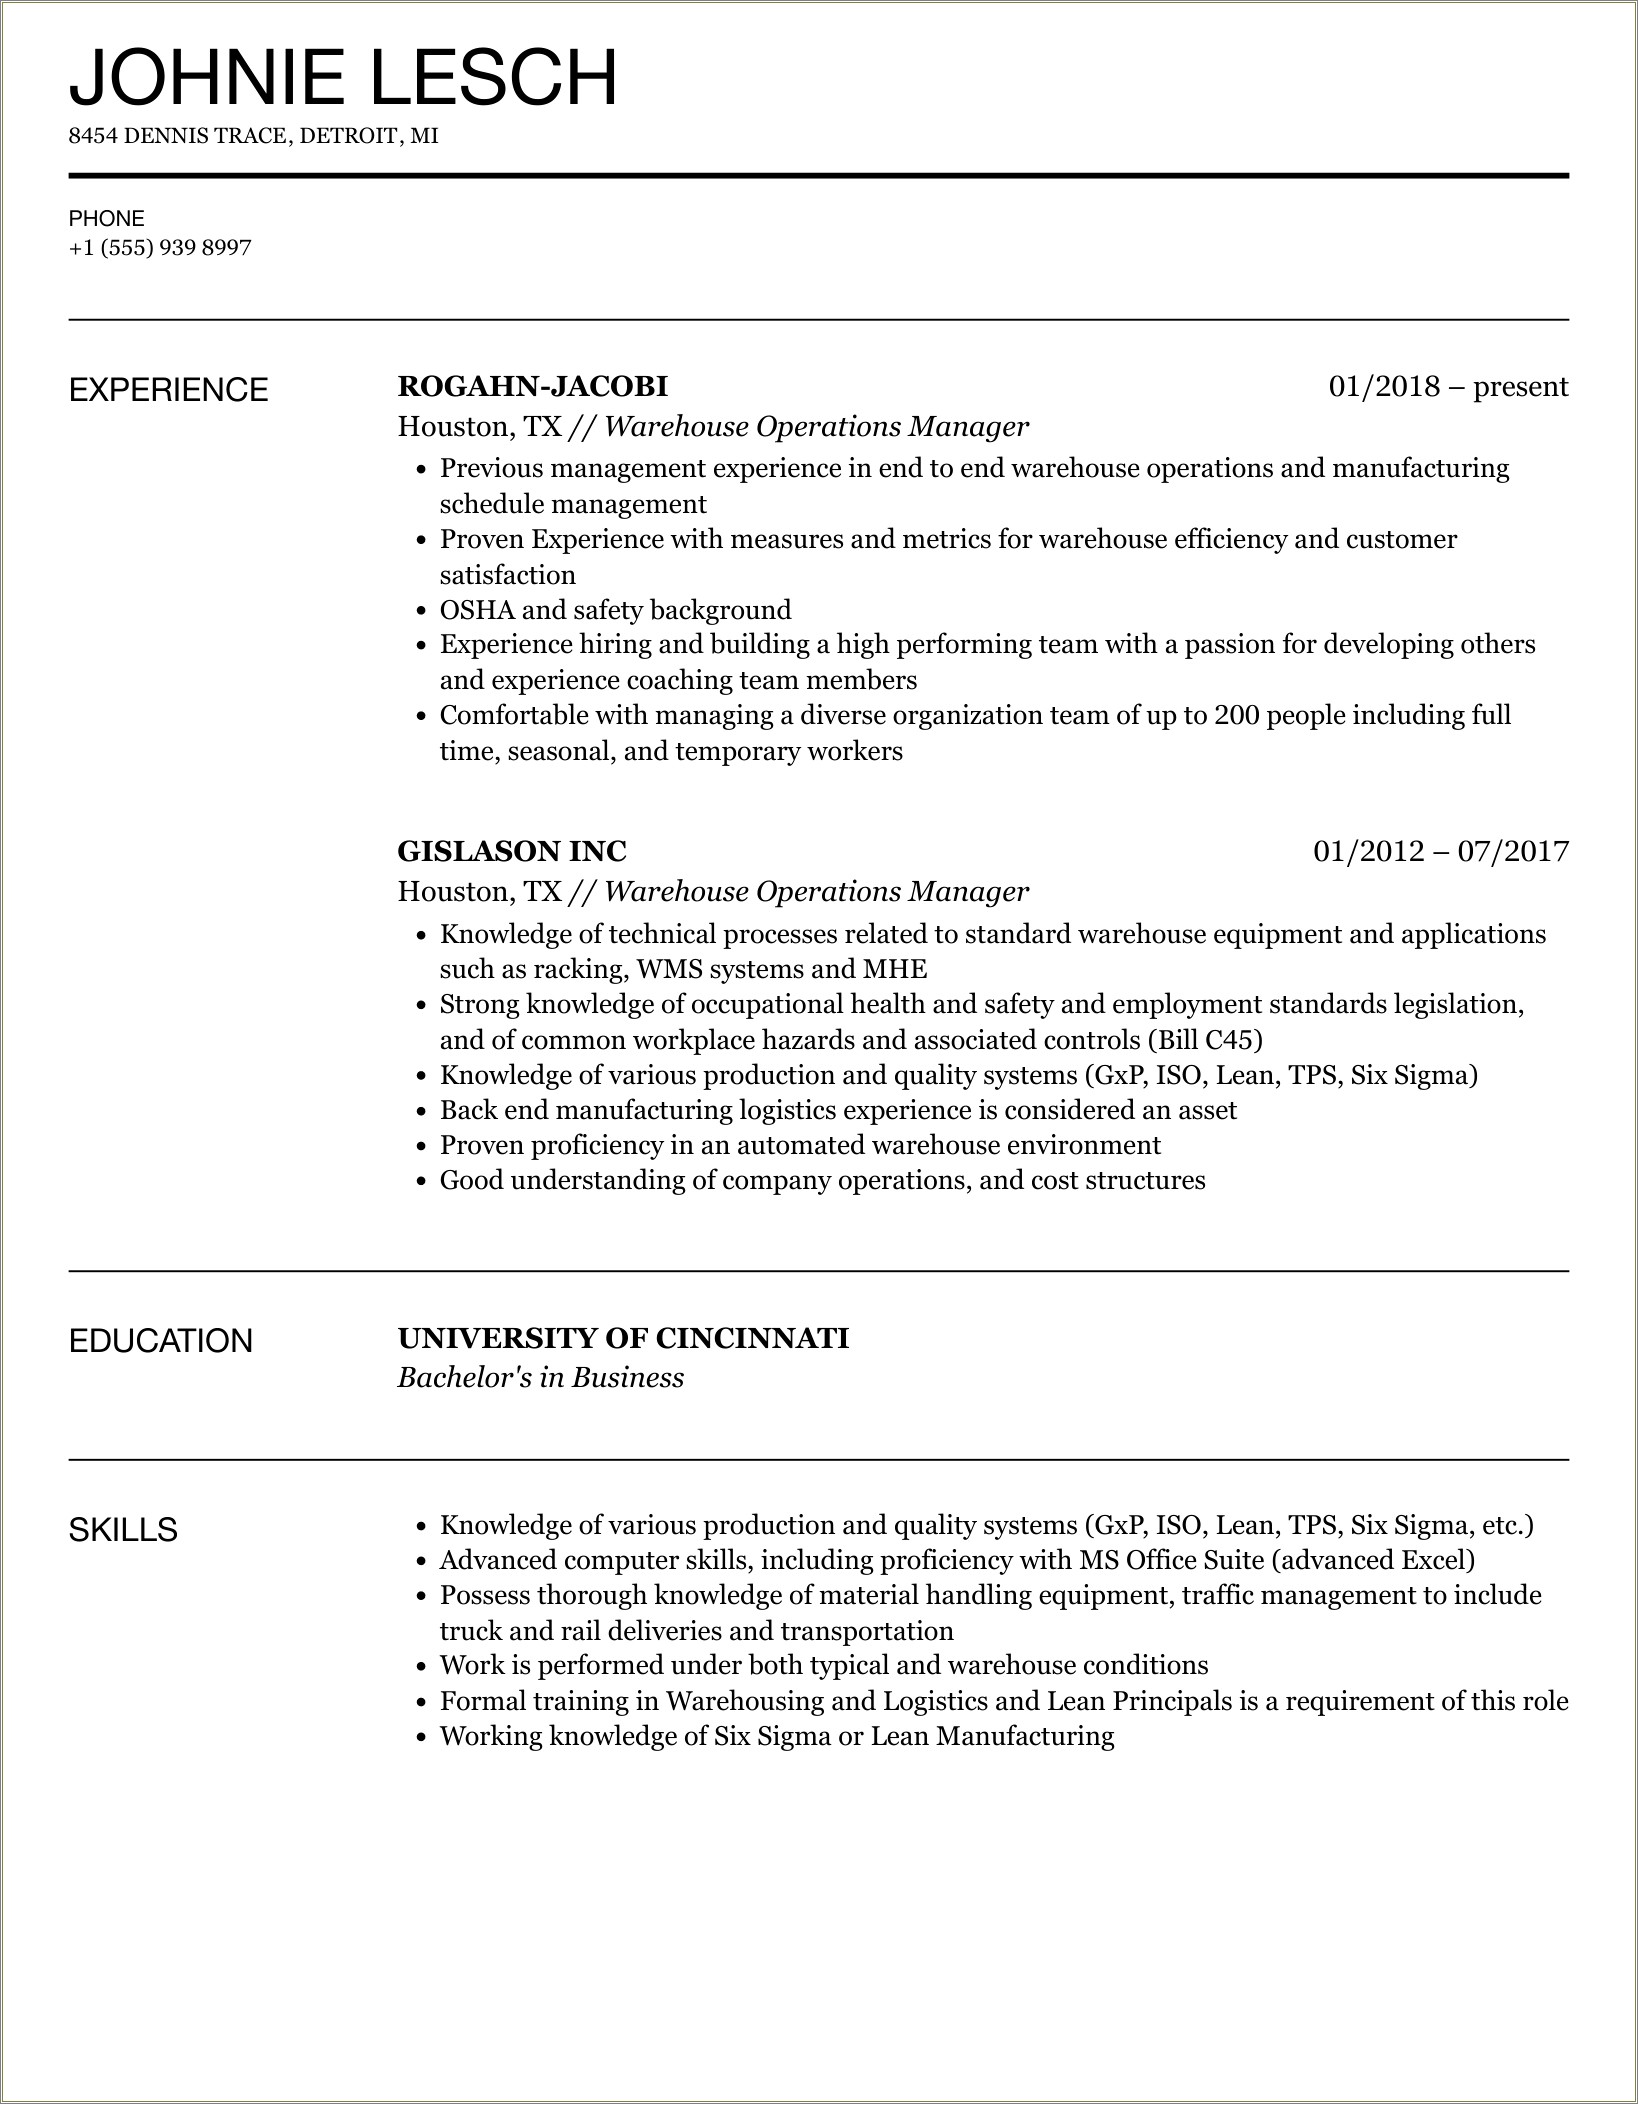 Sample Resume For Warehouse Operations Manager